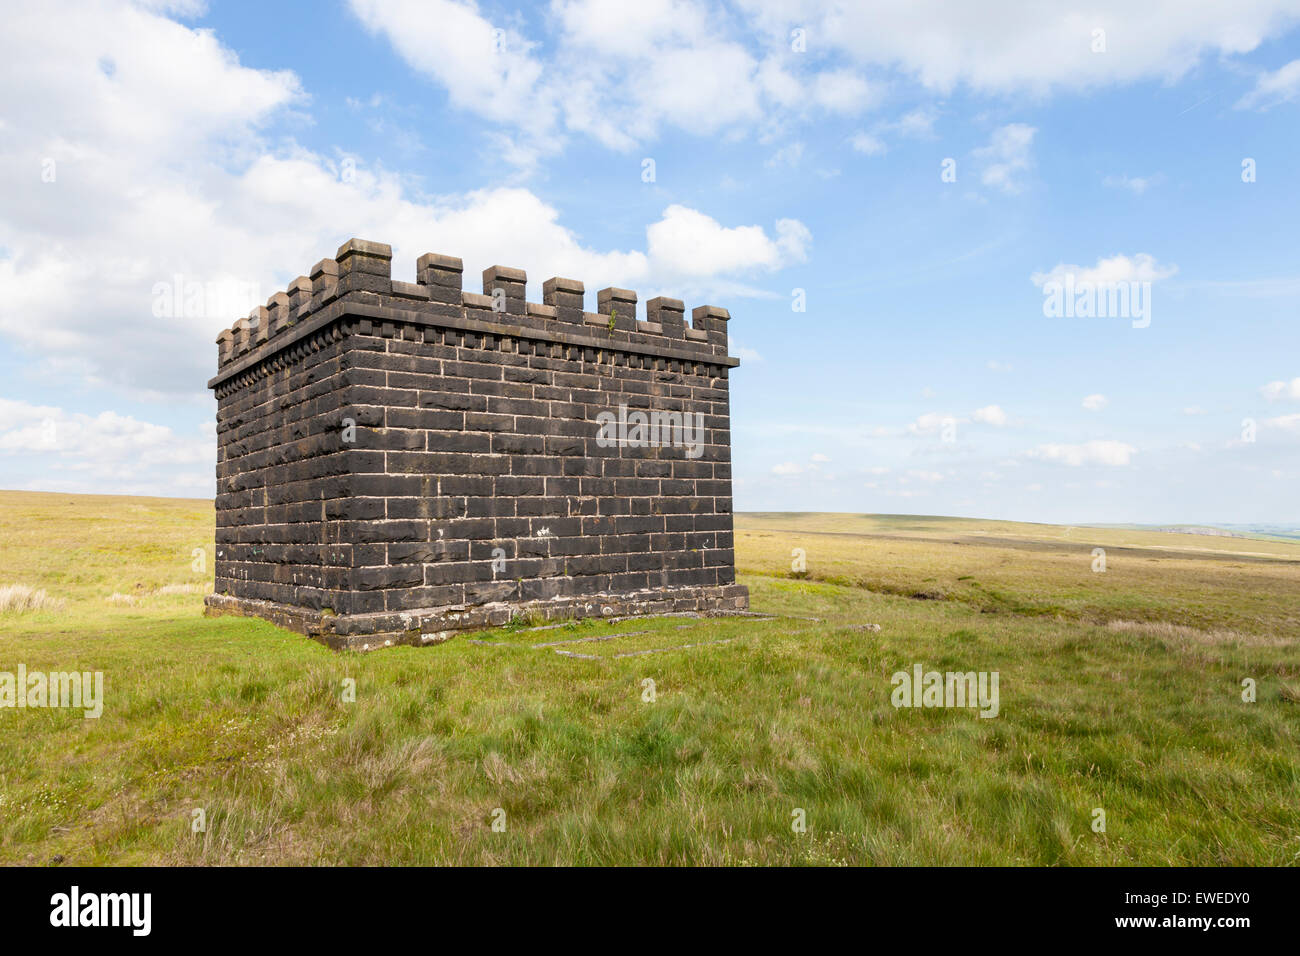 An air shaft with castellated walls giving ventilation to the railway line in Cowburn Tunnel, Derbyshire, Peak District, England, UK Stock Photo